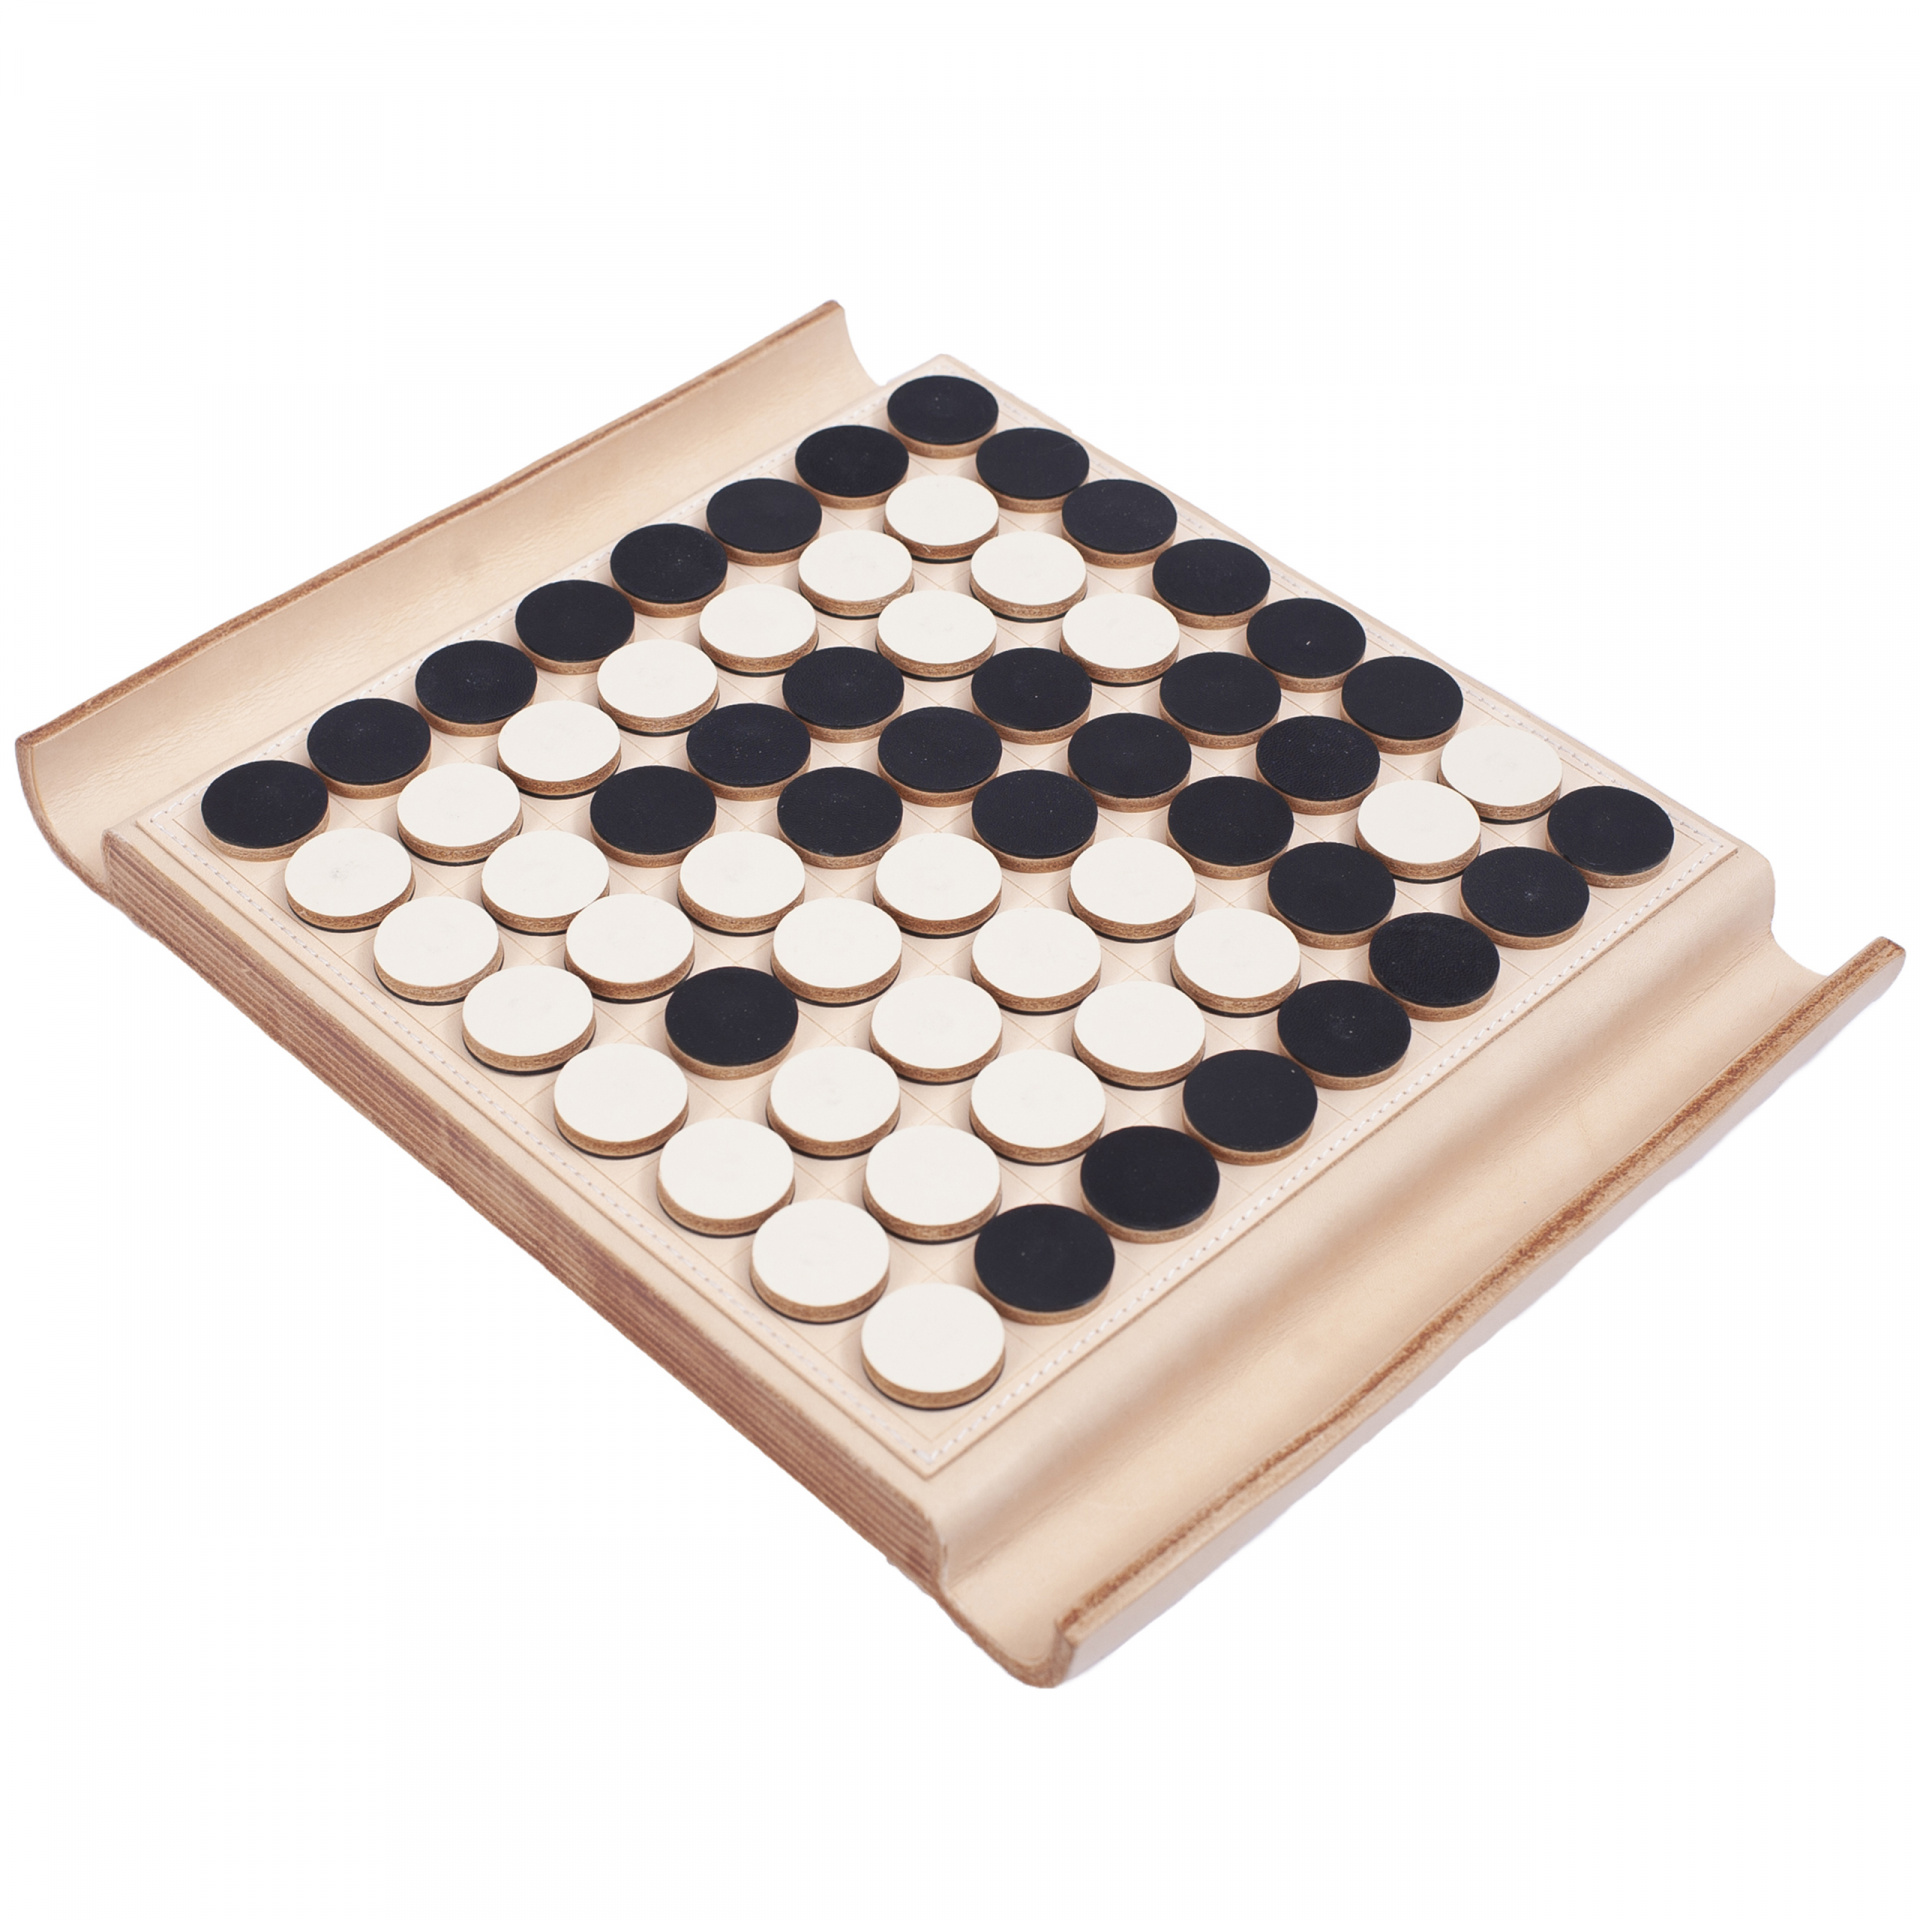 Hender Scheme Leather Table Game